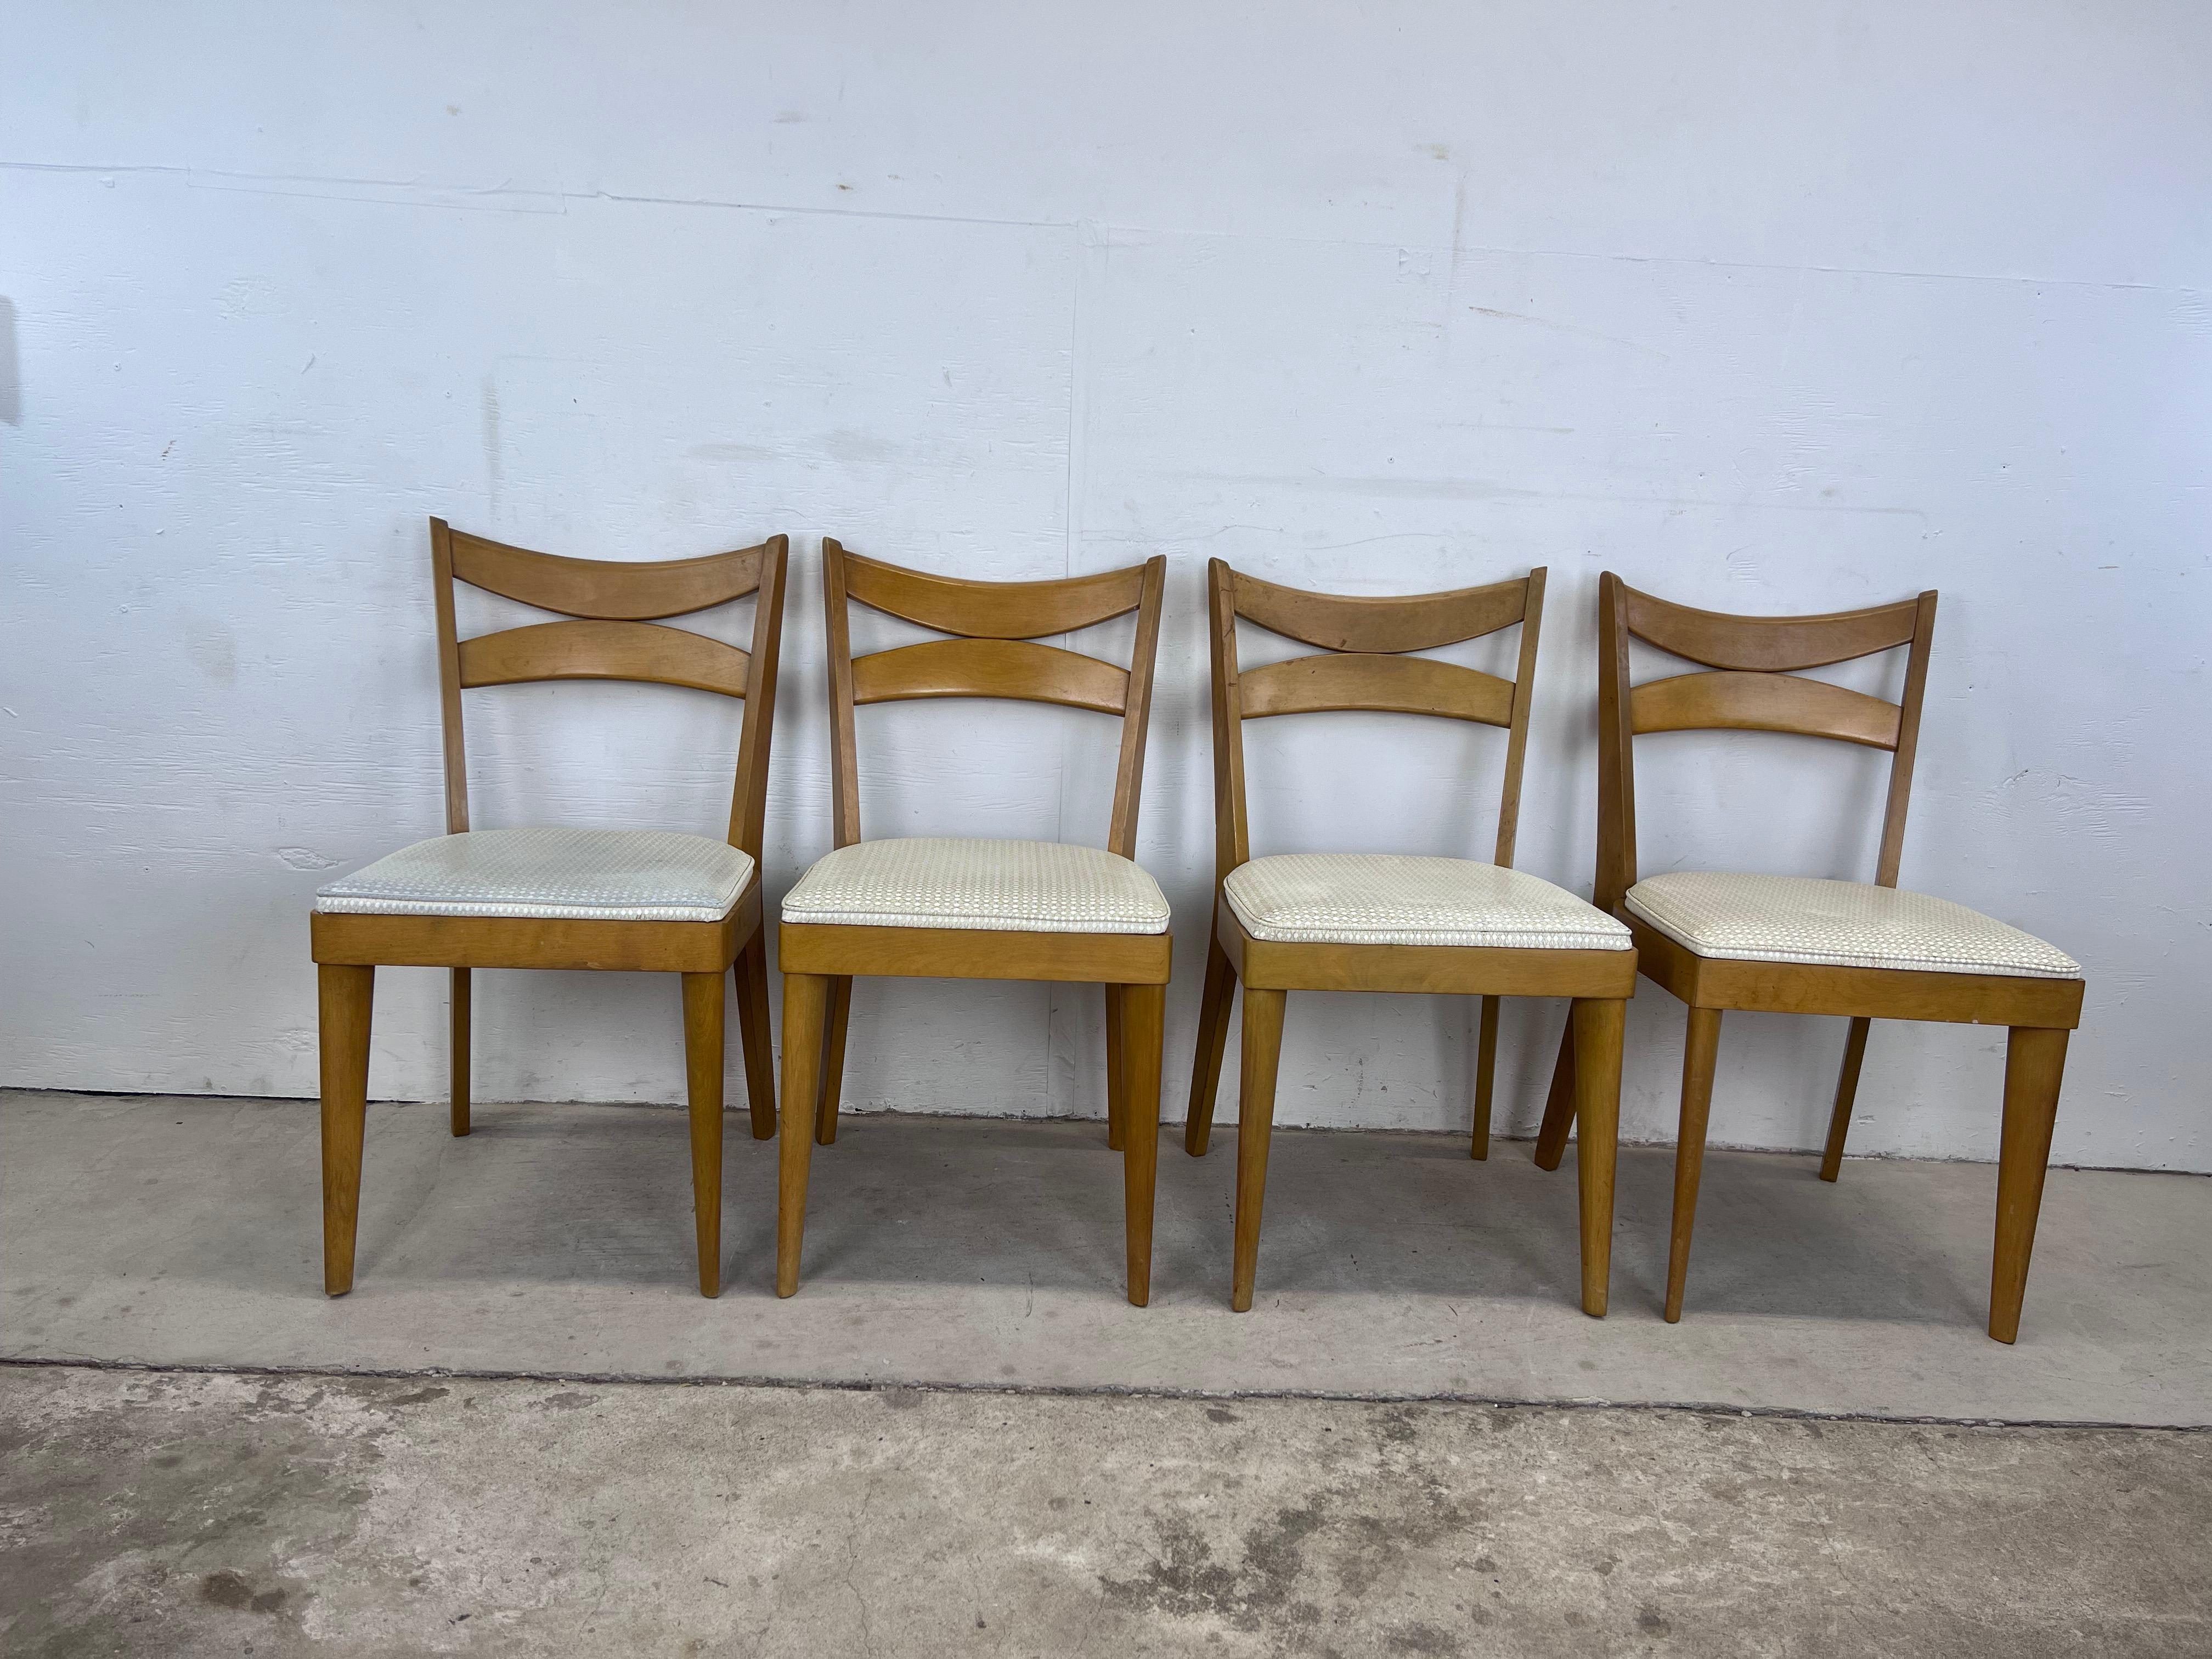 This set of 4 Mid-Century Modern dining chairs by Heywood Wakefield features hardwood construction, original champagne finish, unique bentwood backs, vintage upholstery, and tall tapered legs.


